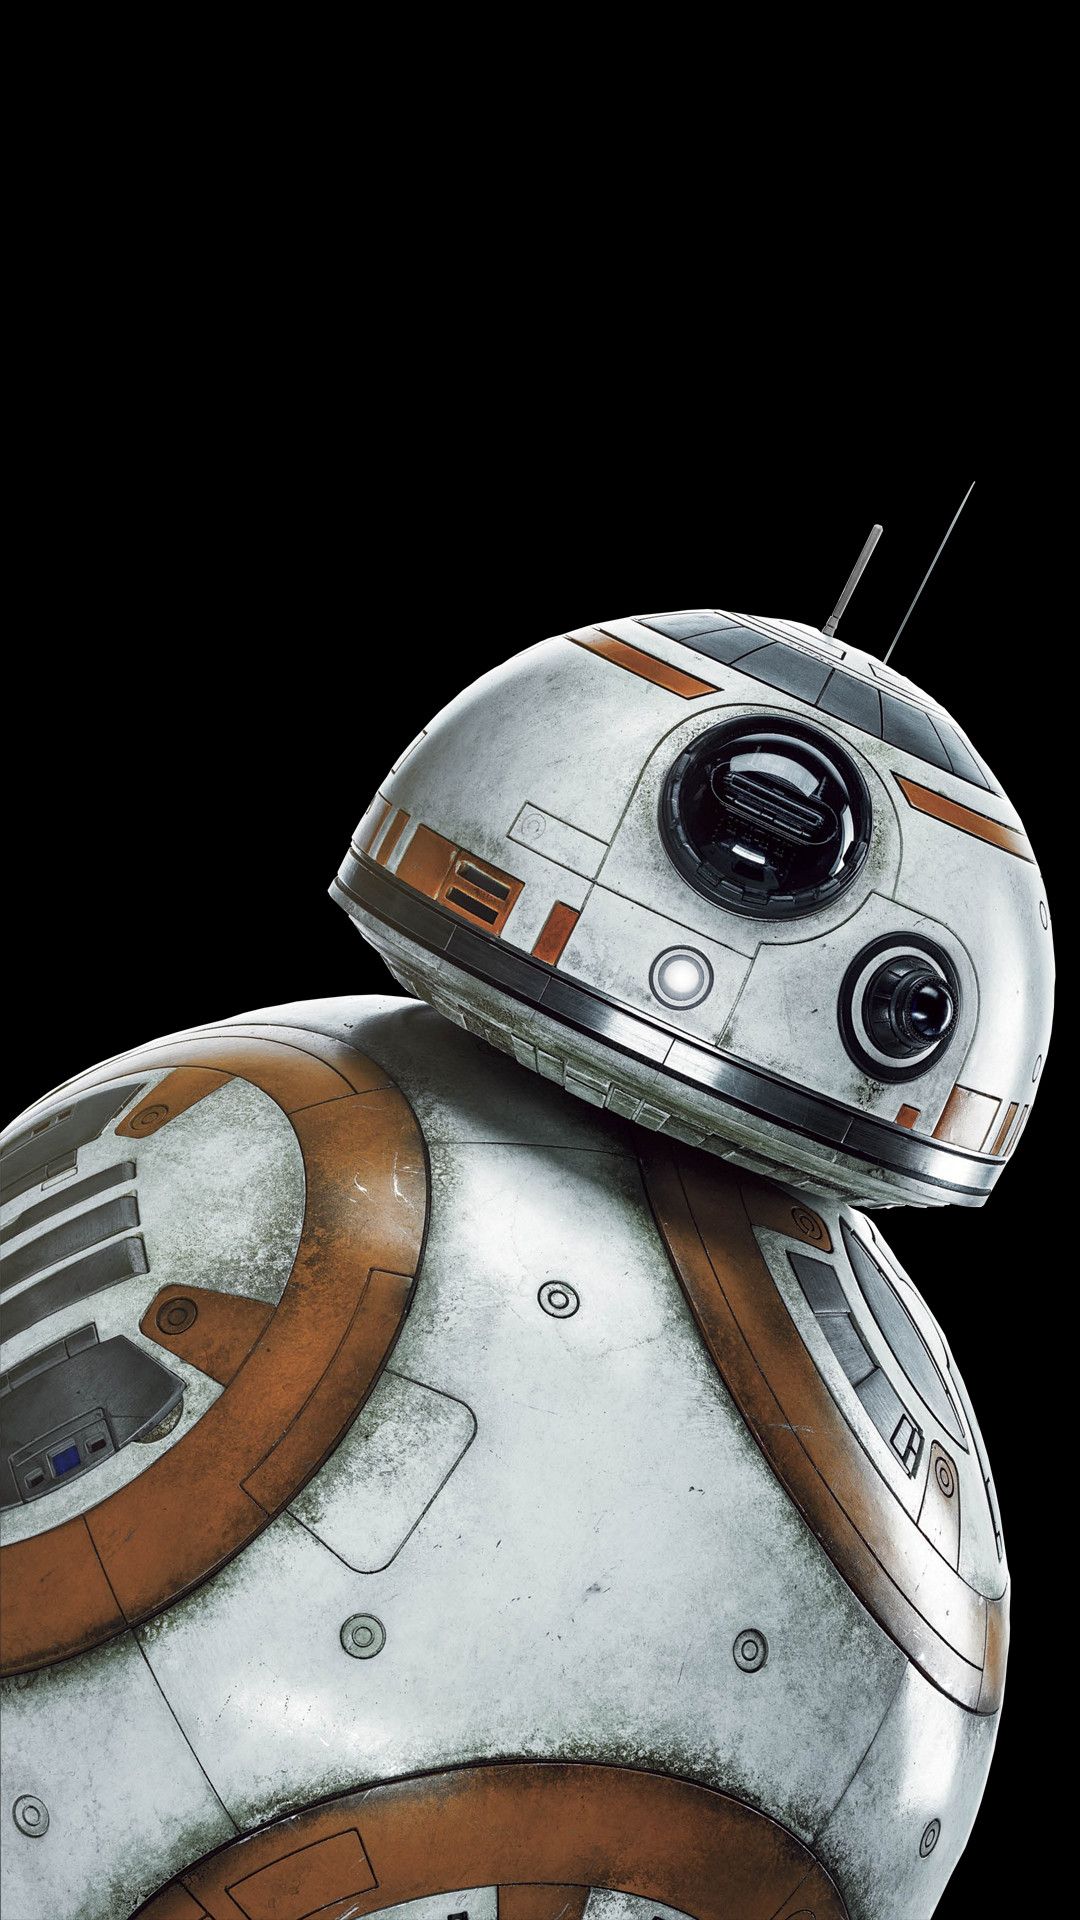 Bb8 Iphone Wallpapers